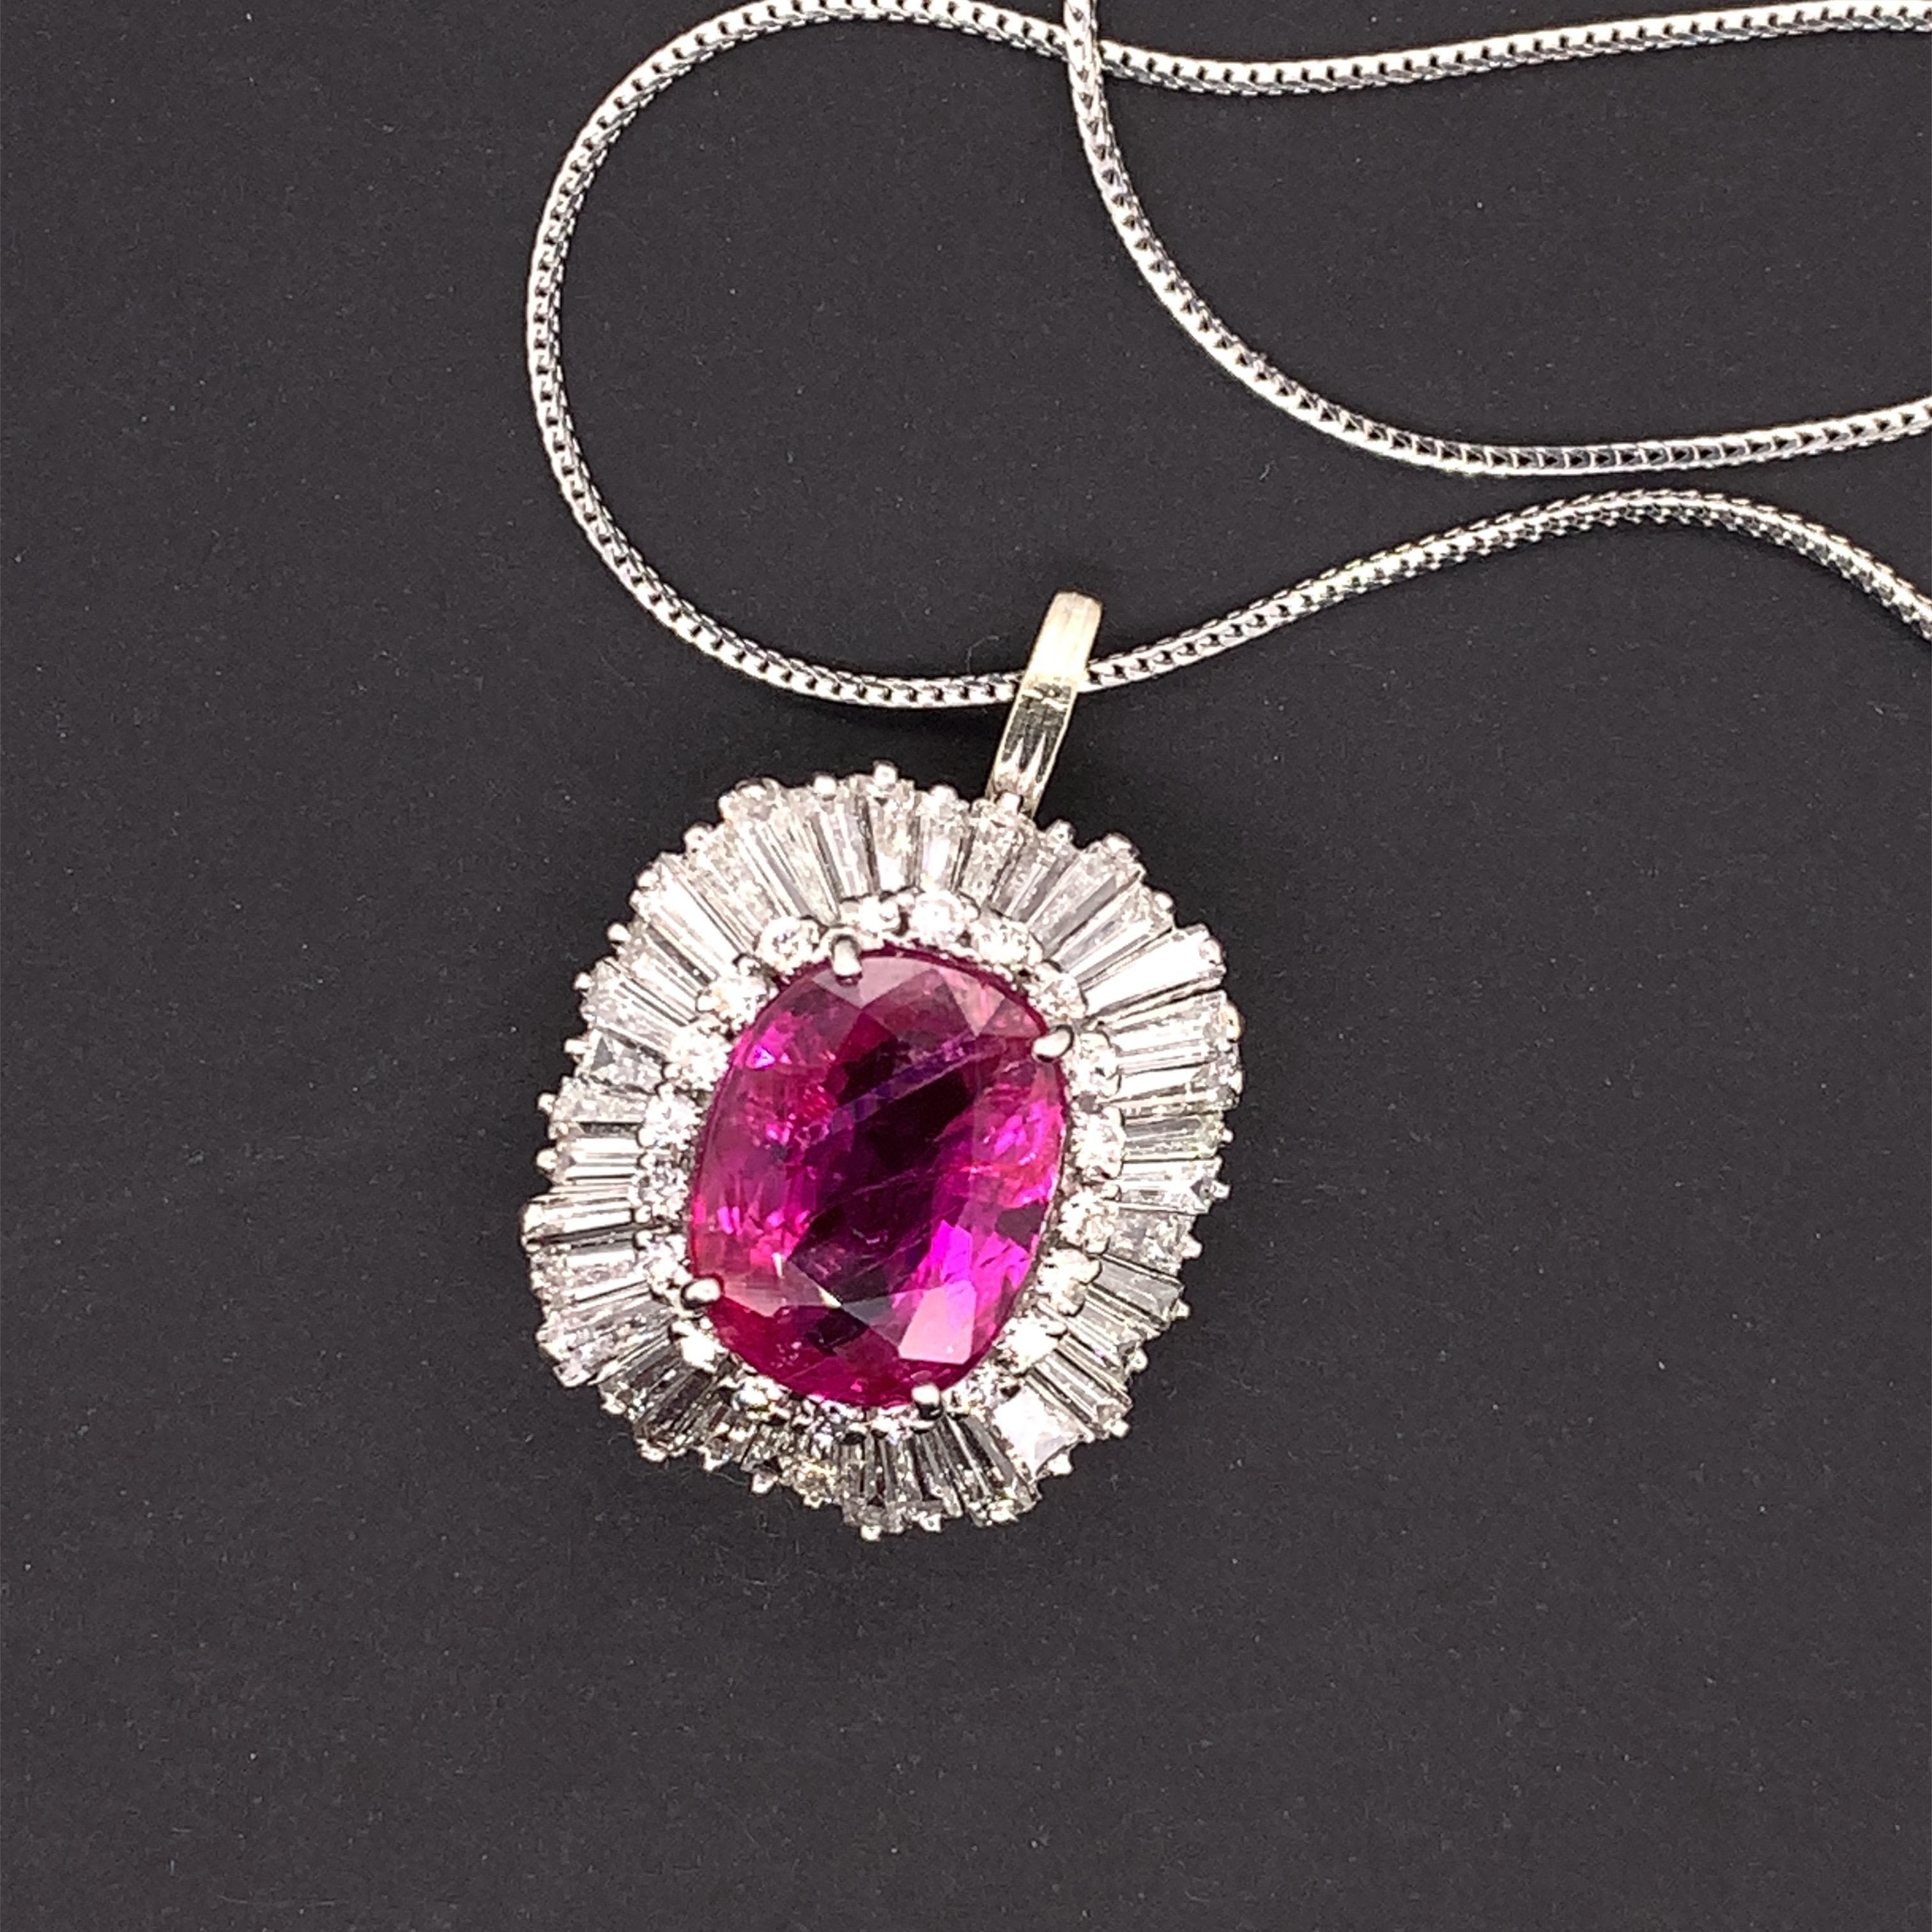 GIA 7.47 Carat Unheated Ruby Pendant/Ring For Sale 2